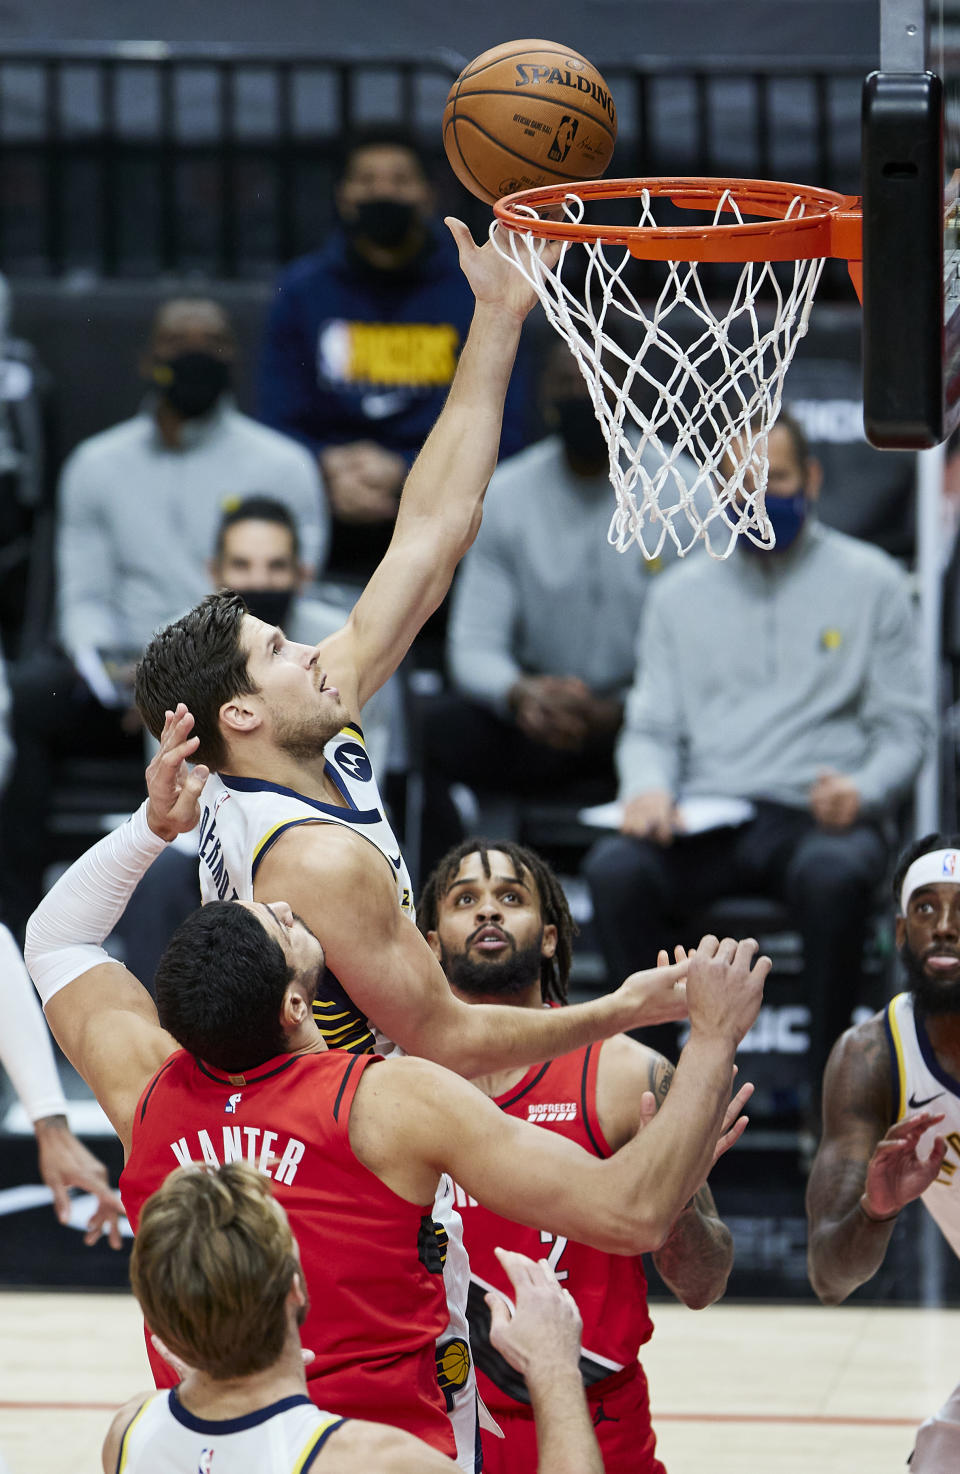 Indiana Pacers forward Doug McDermott, center, shoots between Portland Trail Blazers center Enes Kanter, left, and guard Gary Trent Jr. during the first half of an NBA basketball game in Portland, Ore., Thursday, Jan. 14, 2021. (AP Photo/Craig Mitchelldyer)